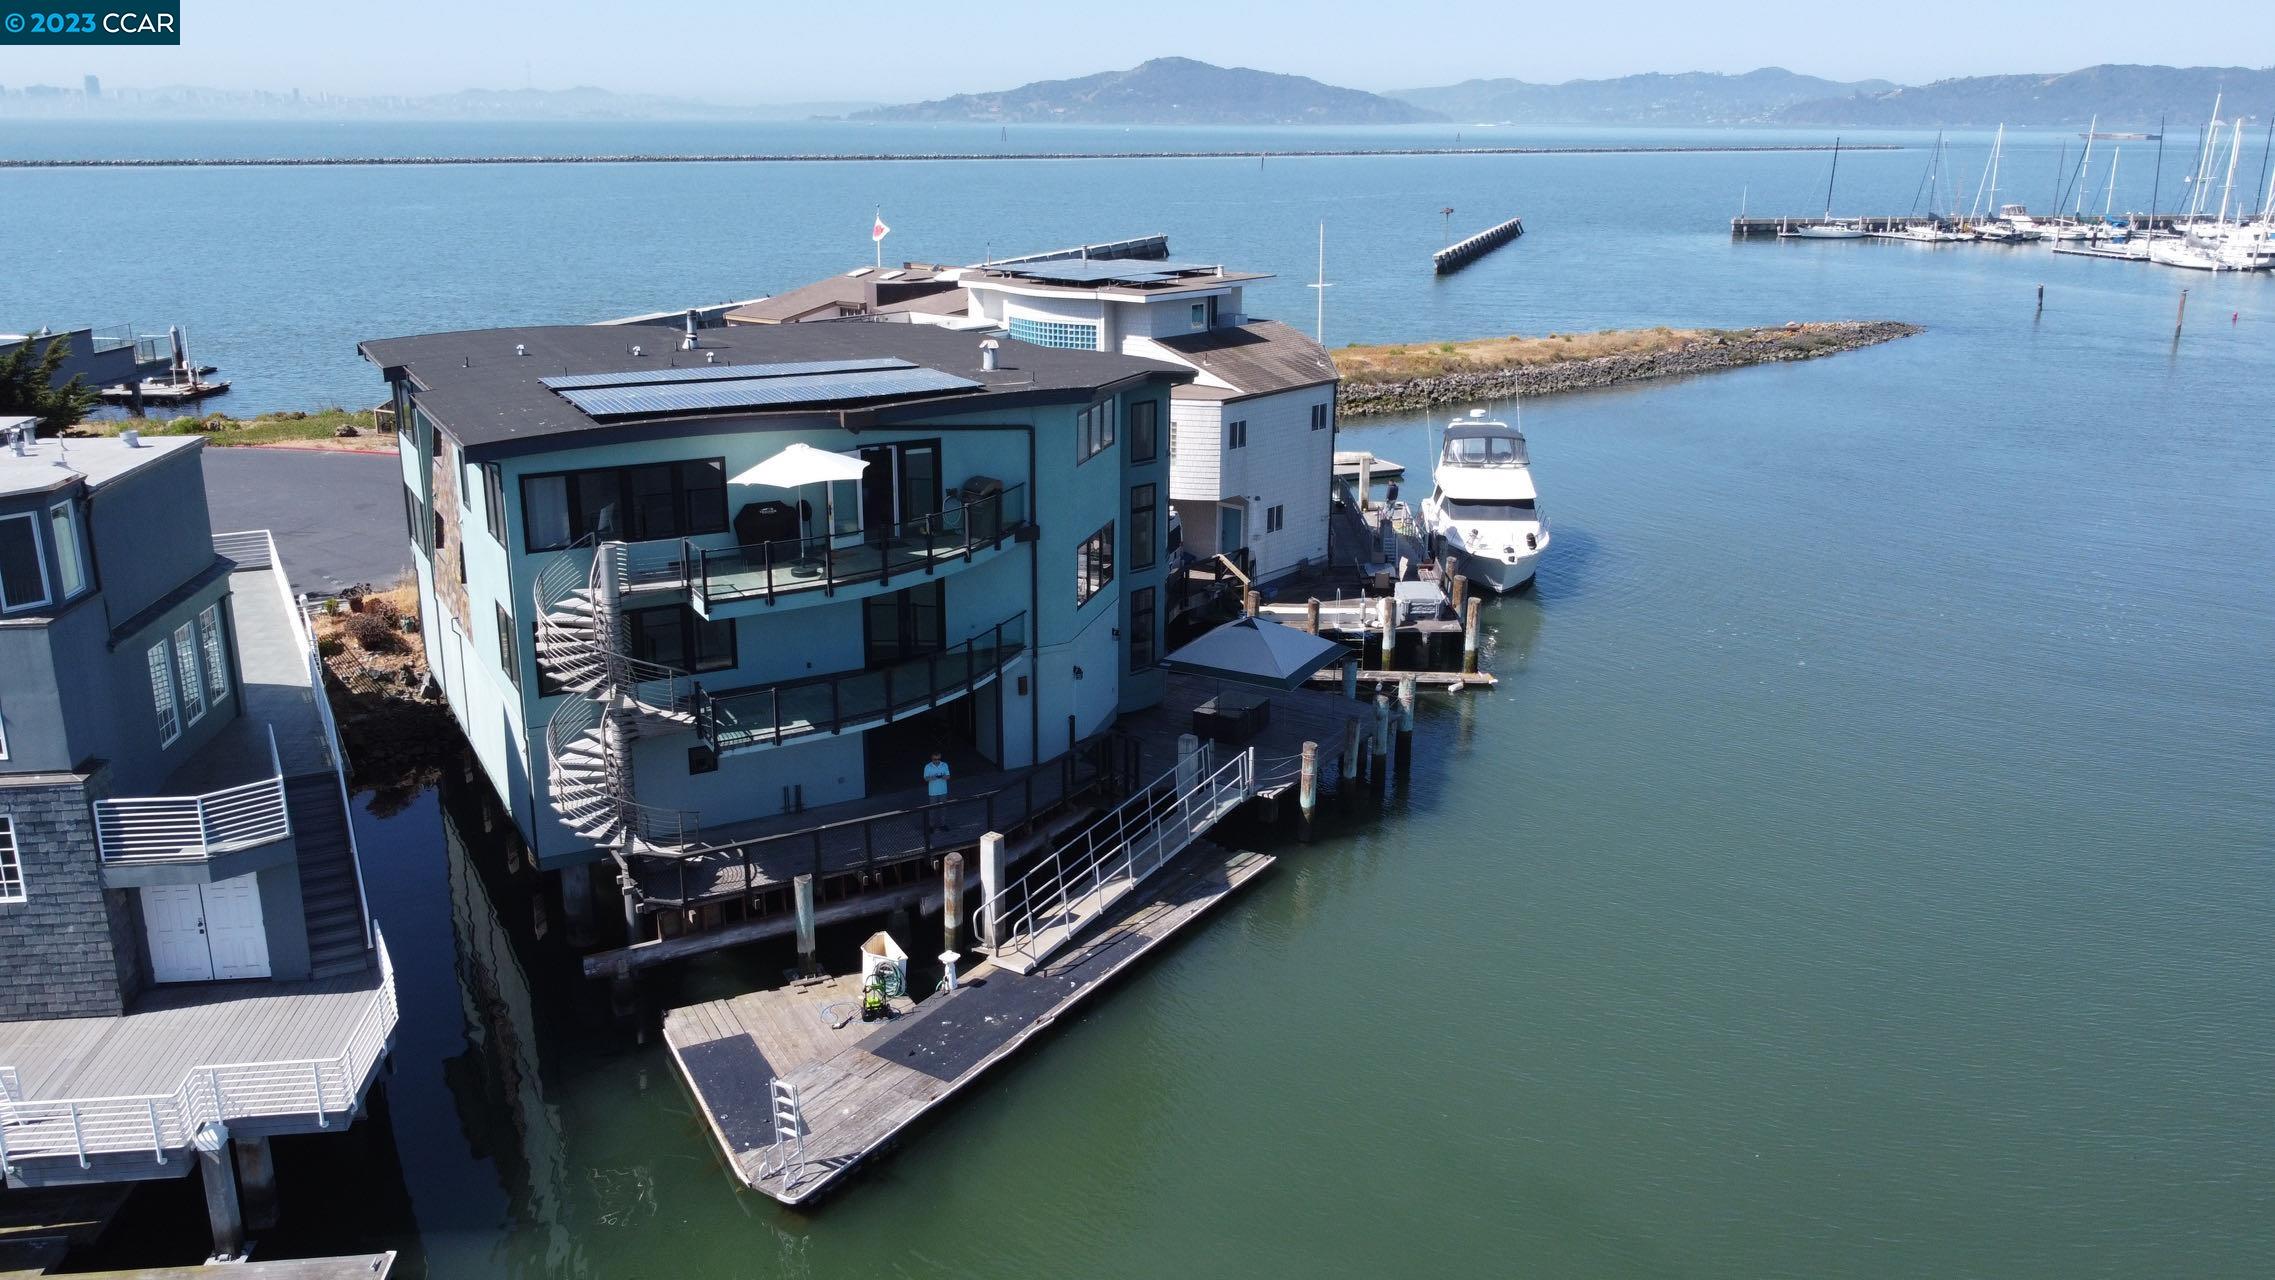 With Commanding 360-degree views of the San Francisco Bay, Bay Bridge and SF's Skyline from almost every room. This Luxurious waterfront masterpiece was built in 2005 and features a 55-foot boat dock with 104 feet of water frontage, 4 suite bedrooms + office and 2 partial baths, an open-concept chef's kitchen, expansive living room, additional recreation room and multiple outdoor living spaces perfect for enjoying quintessential waterfront living at its finest. The High-quality construction and attention to detail are obvious throughout every aspect including the concrete pilings and concrete deck which support the home, designed to withstand the test of time on the water. The home is ideally situated at the end of the cul-de-sac. Private elevator services all 3 levels which makes daily life much easier. This home 's striking, contemporary lines are visible from the water and echo the seafaring yachts which pass through the bay.